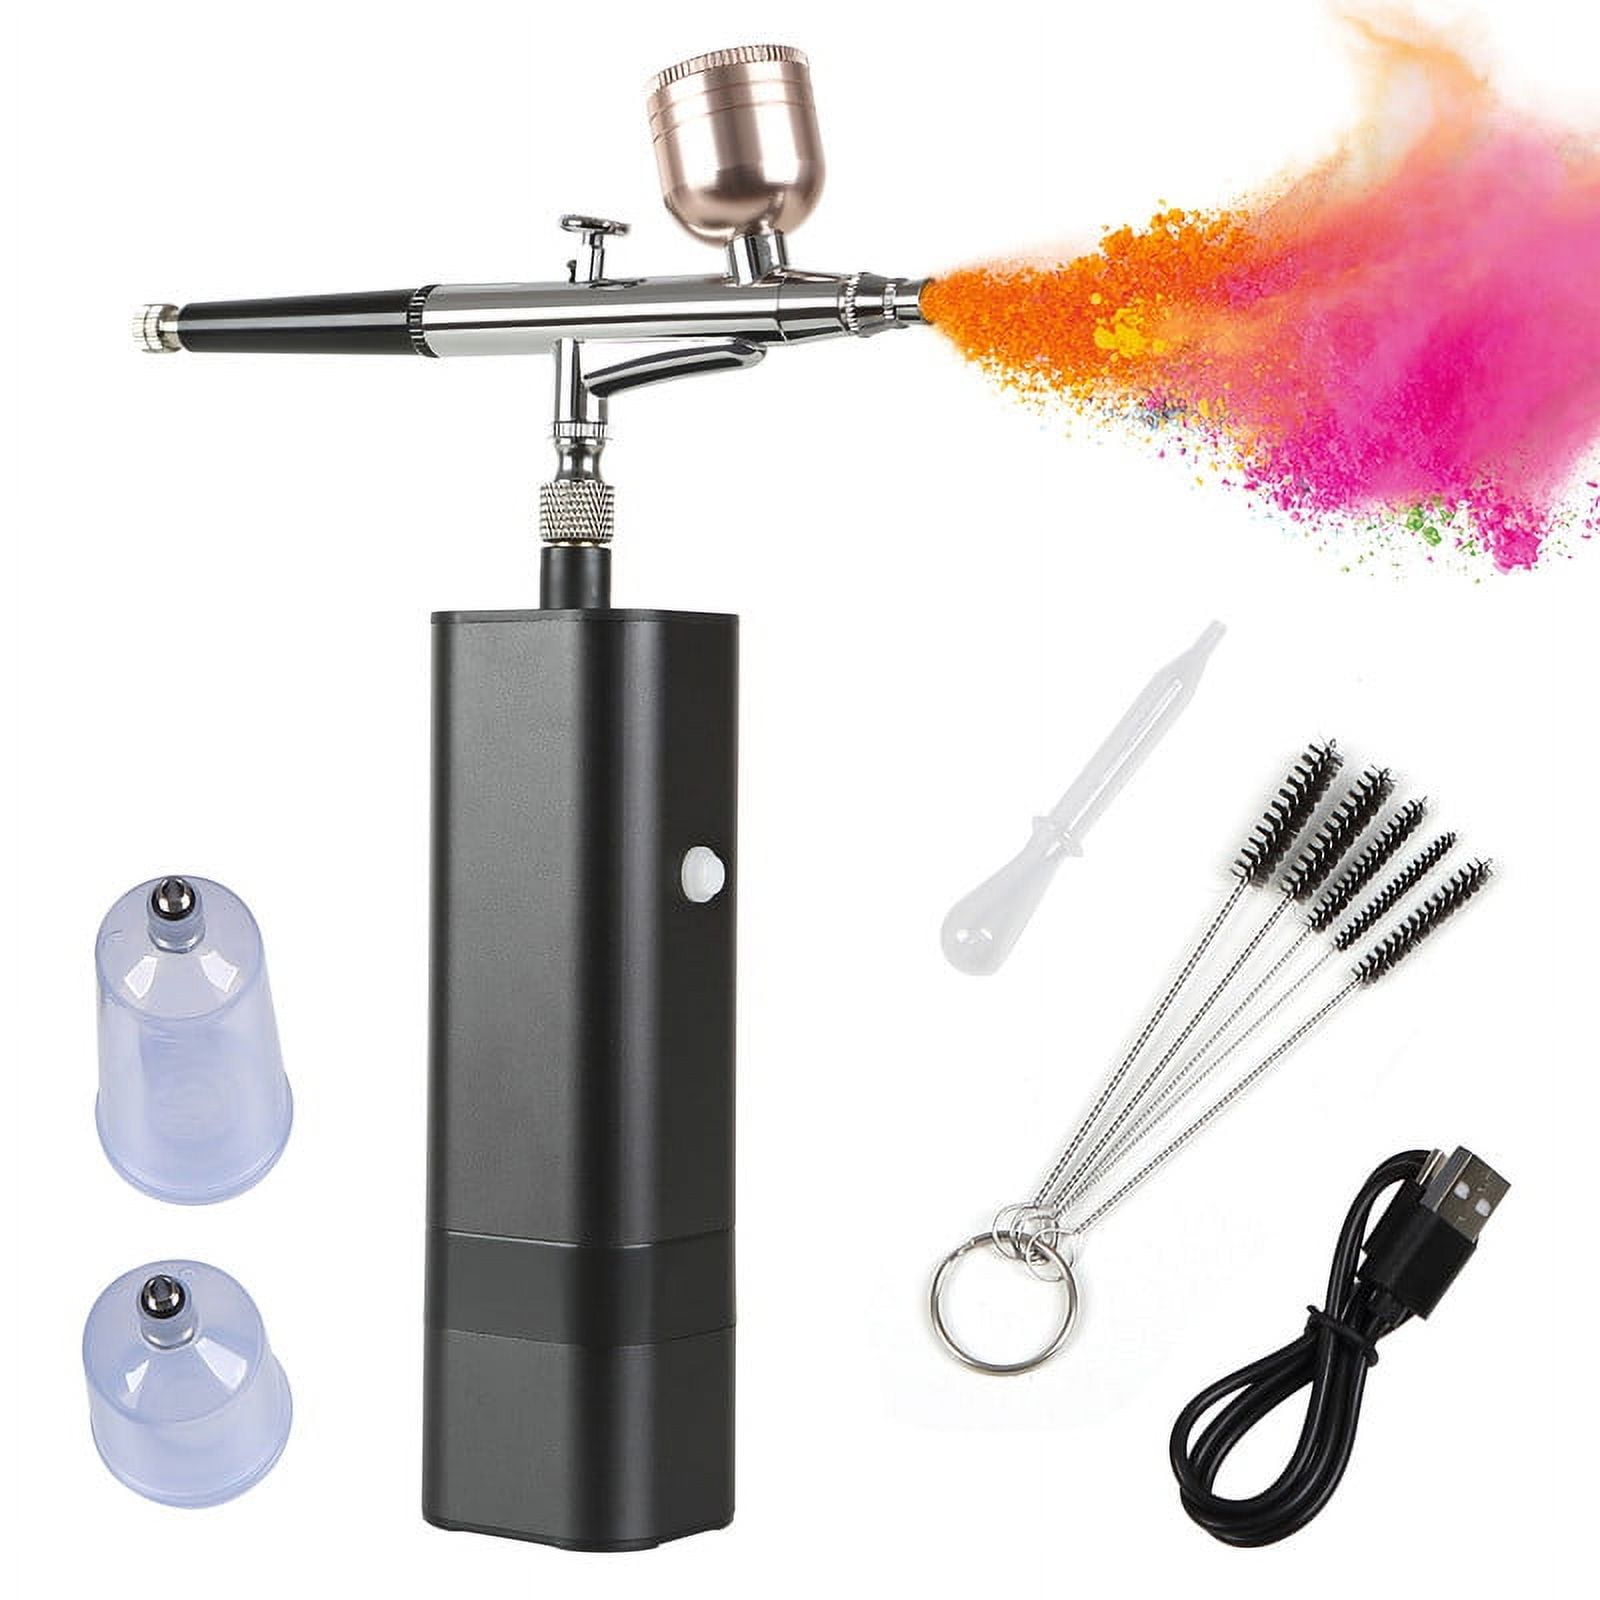 AceFox Cordless Airbrush Kit with Compressor, Portable Airbrush